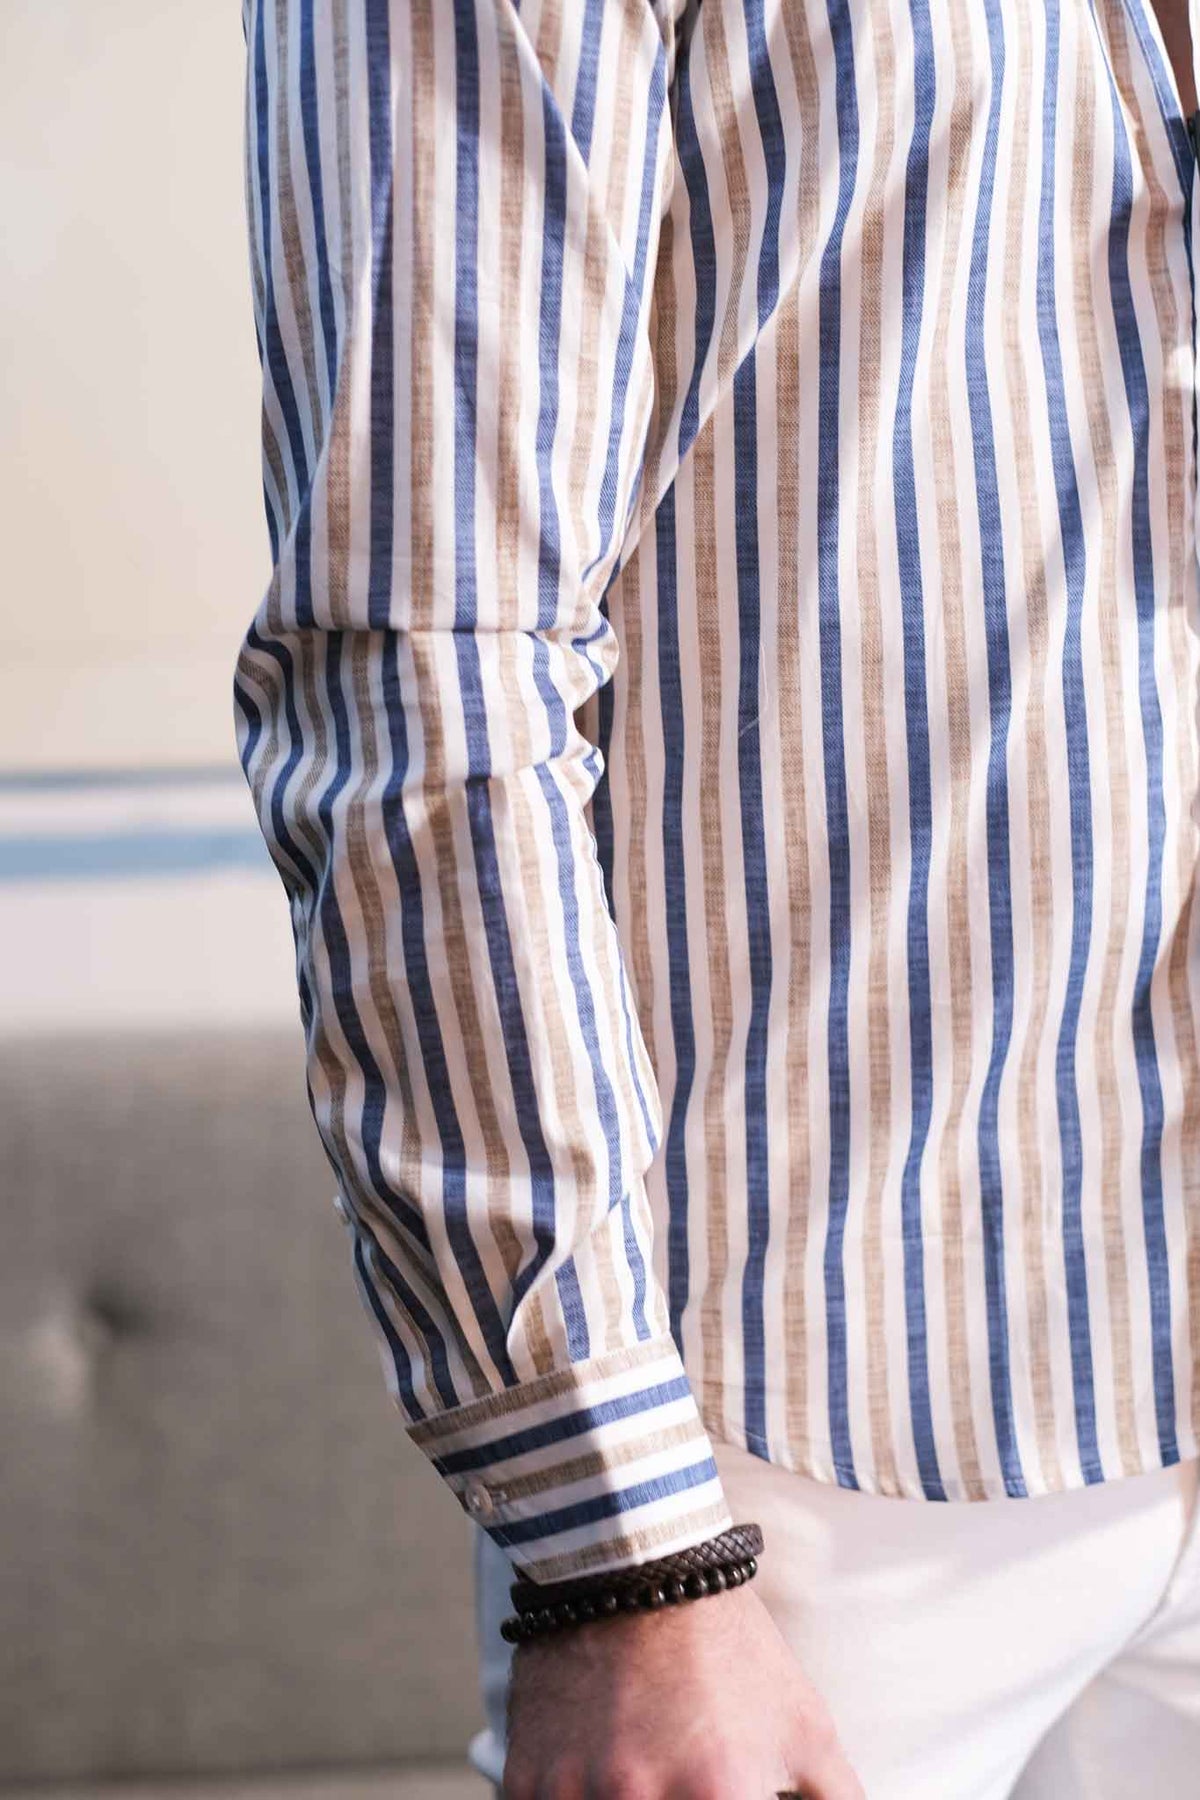 Casual shirt with stripes in beige (Art. 2242-C)